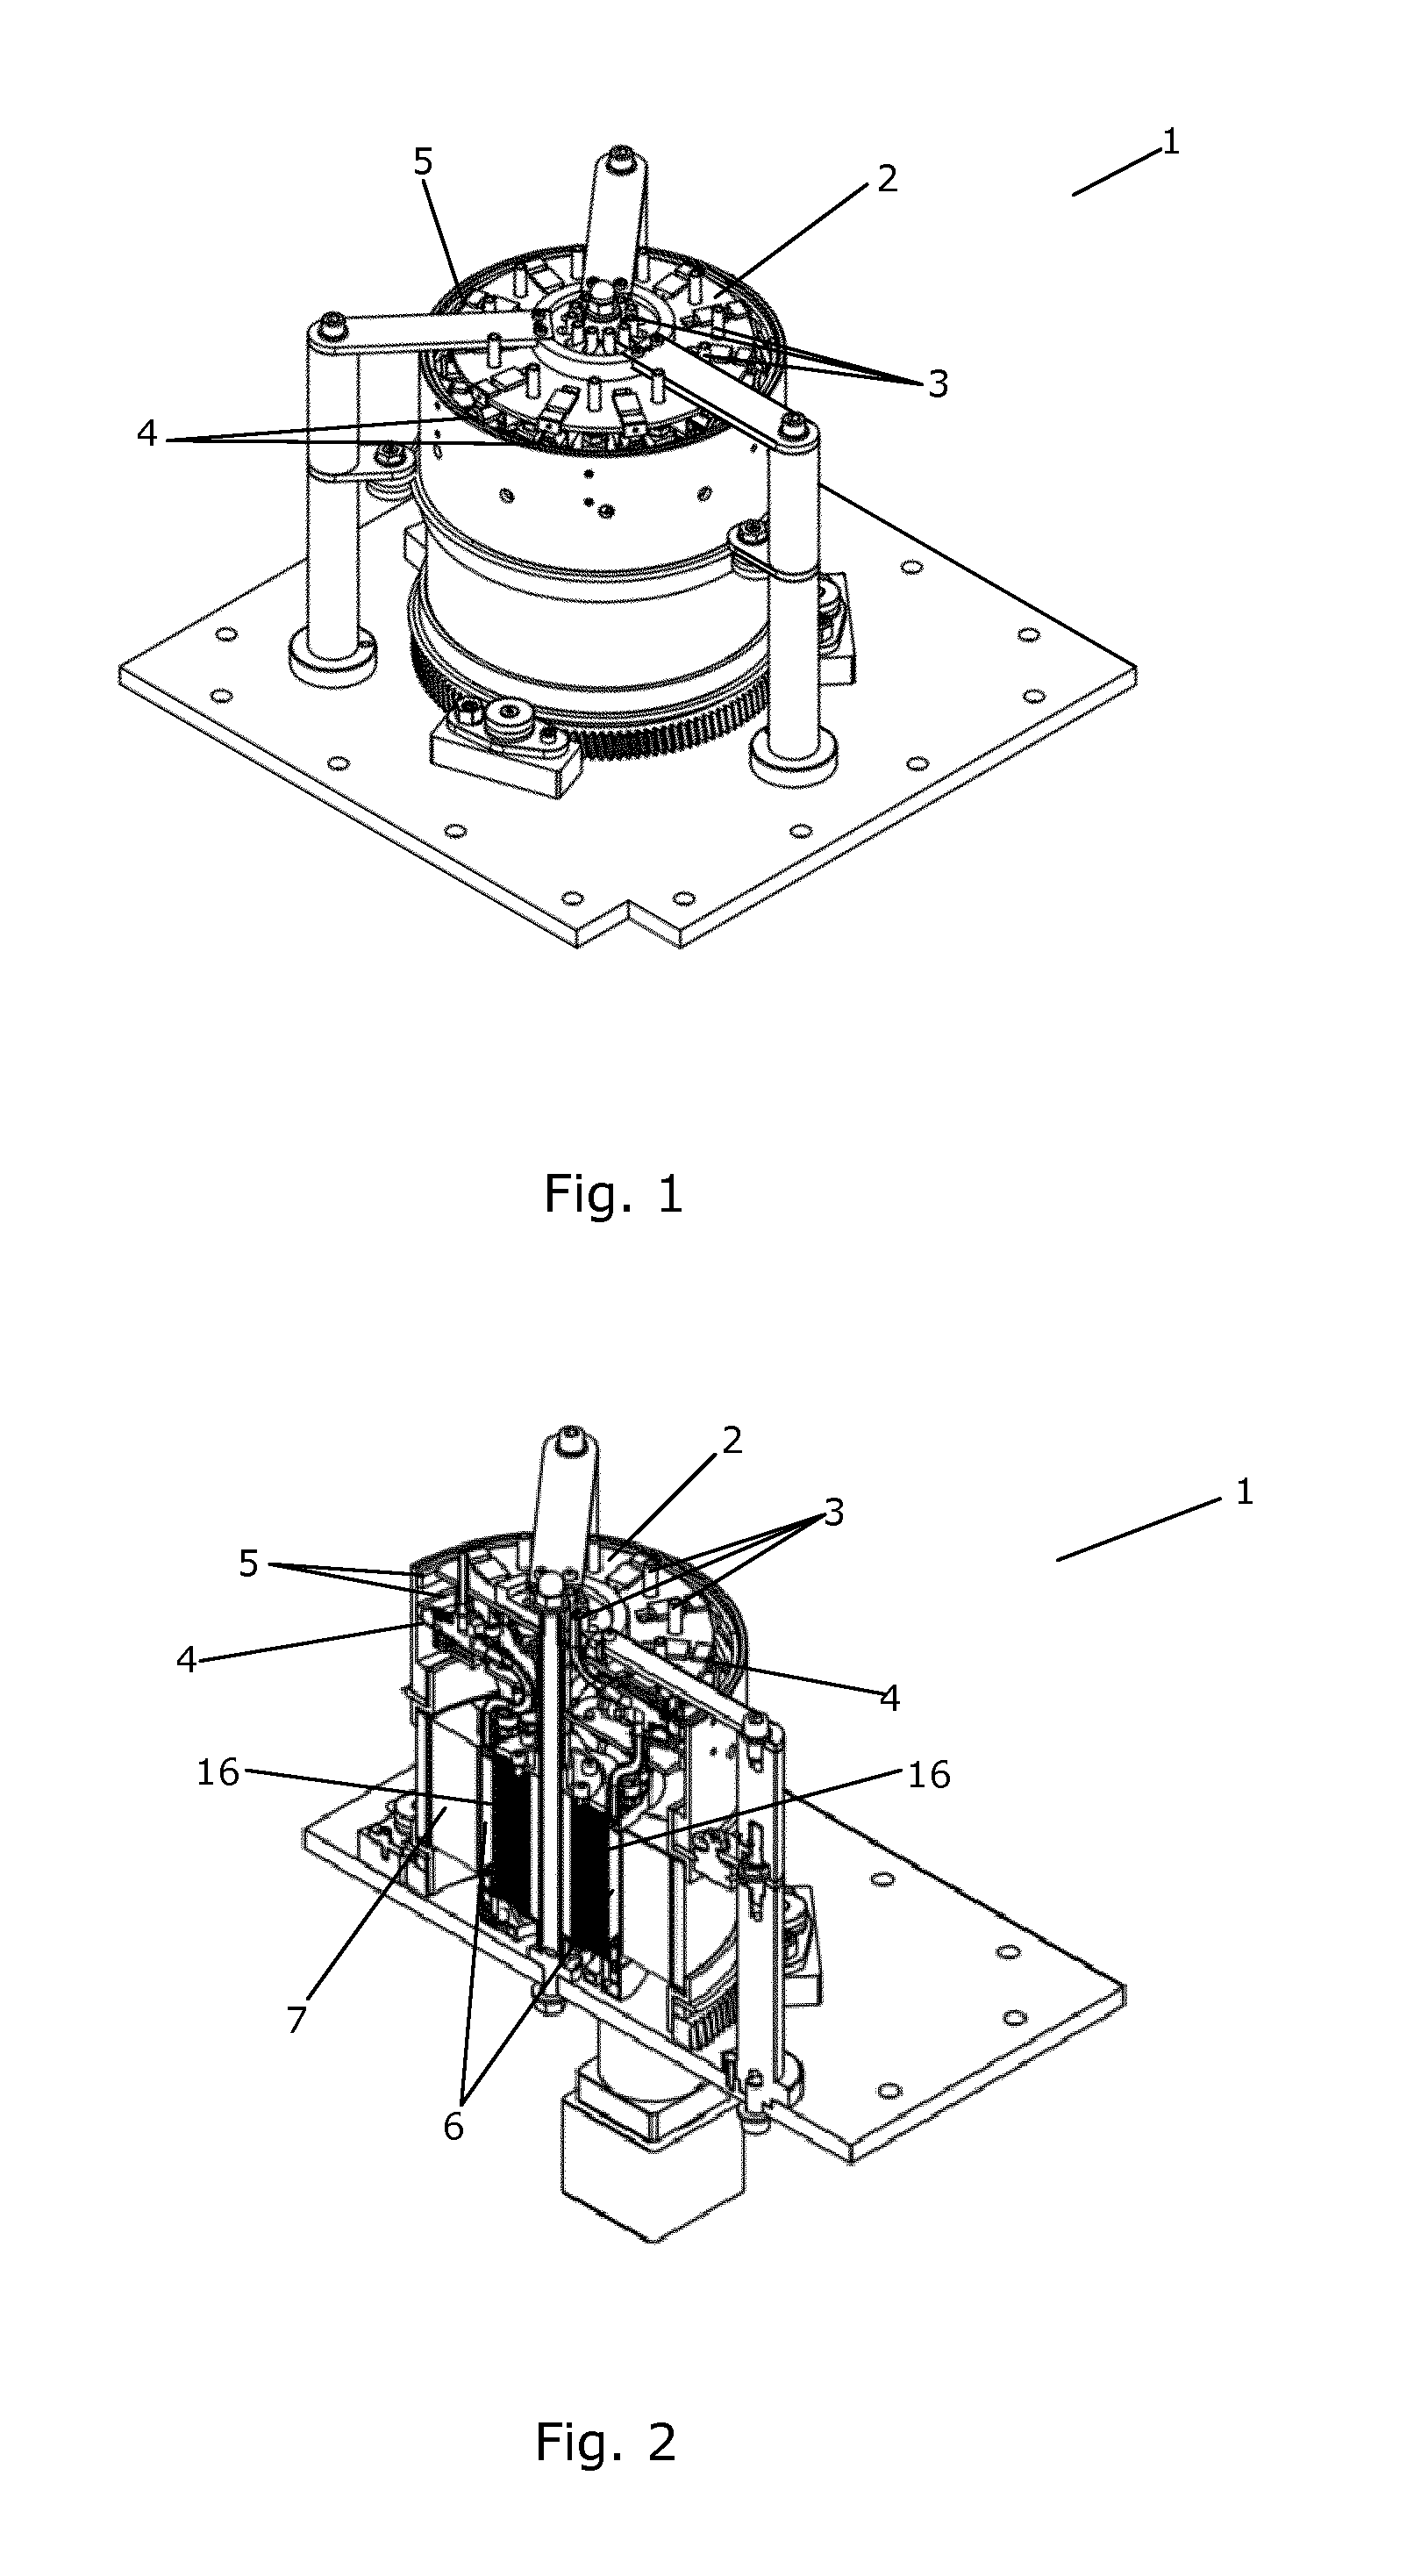 An active magnetic regenerator device